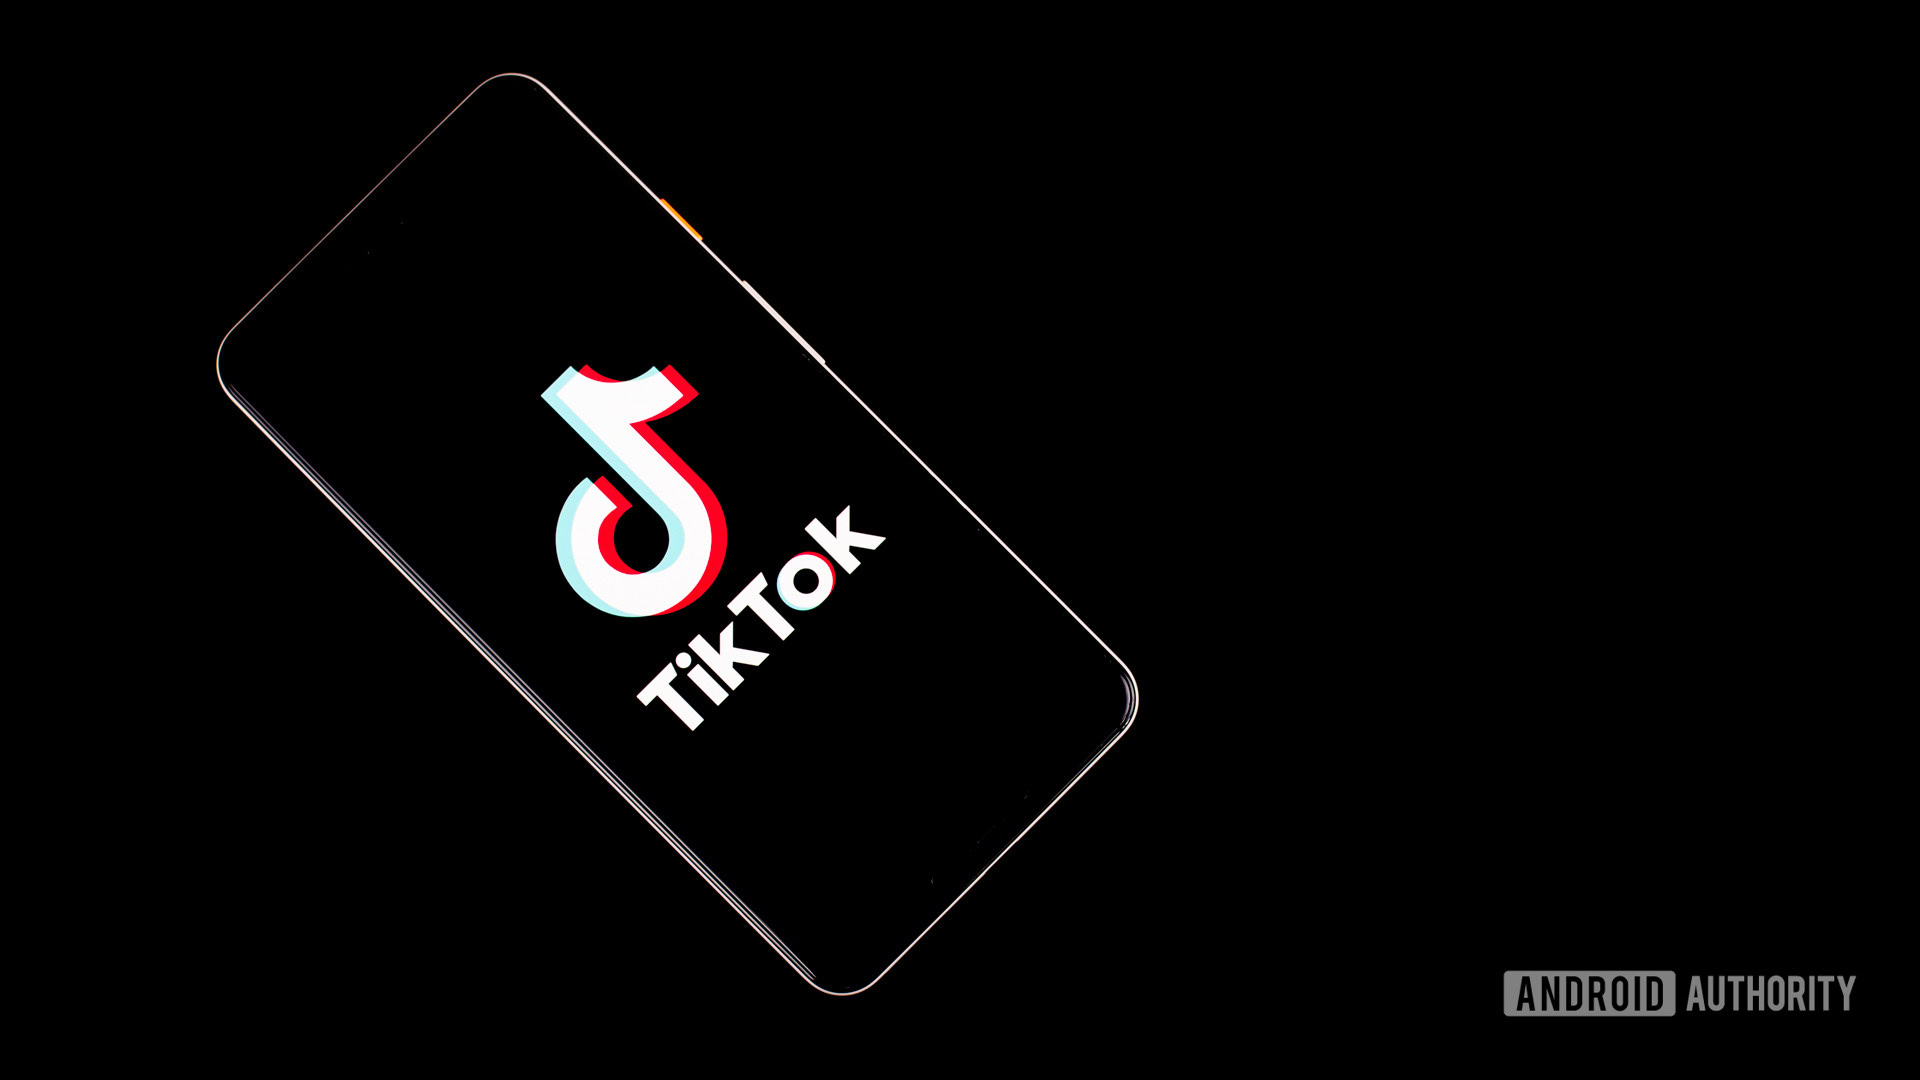 It’s not just you: TikTok is down right now